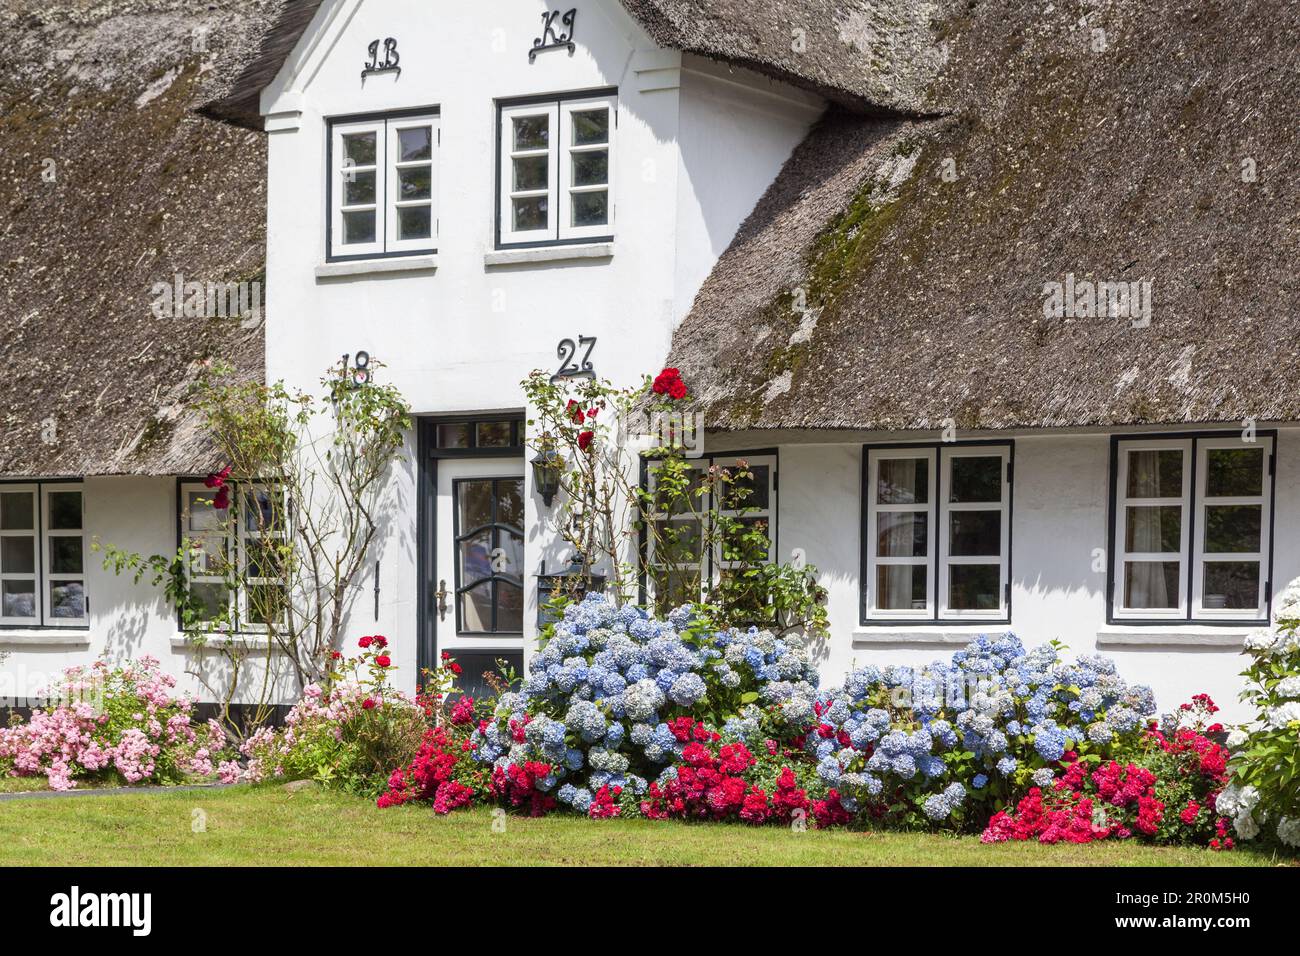 Thatched house in Westerland, North Frisian Island Sylt, North Sea Coast, Schleswig-Holstein, Northern Germany, Germany, Europe Stock Photo